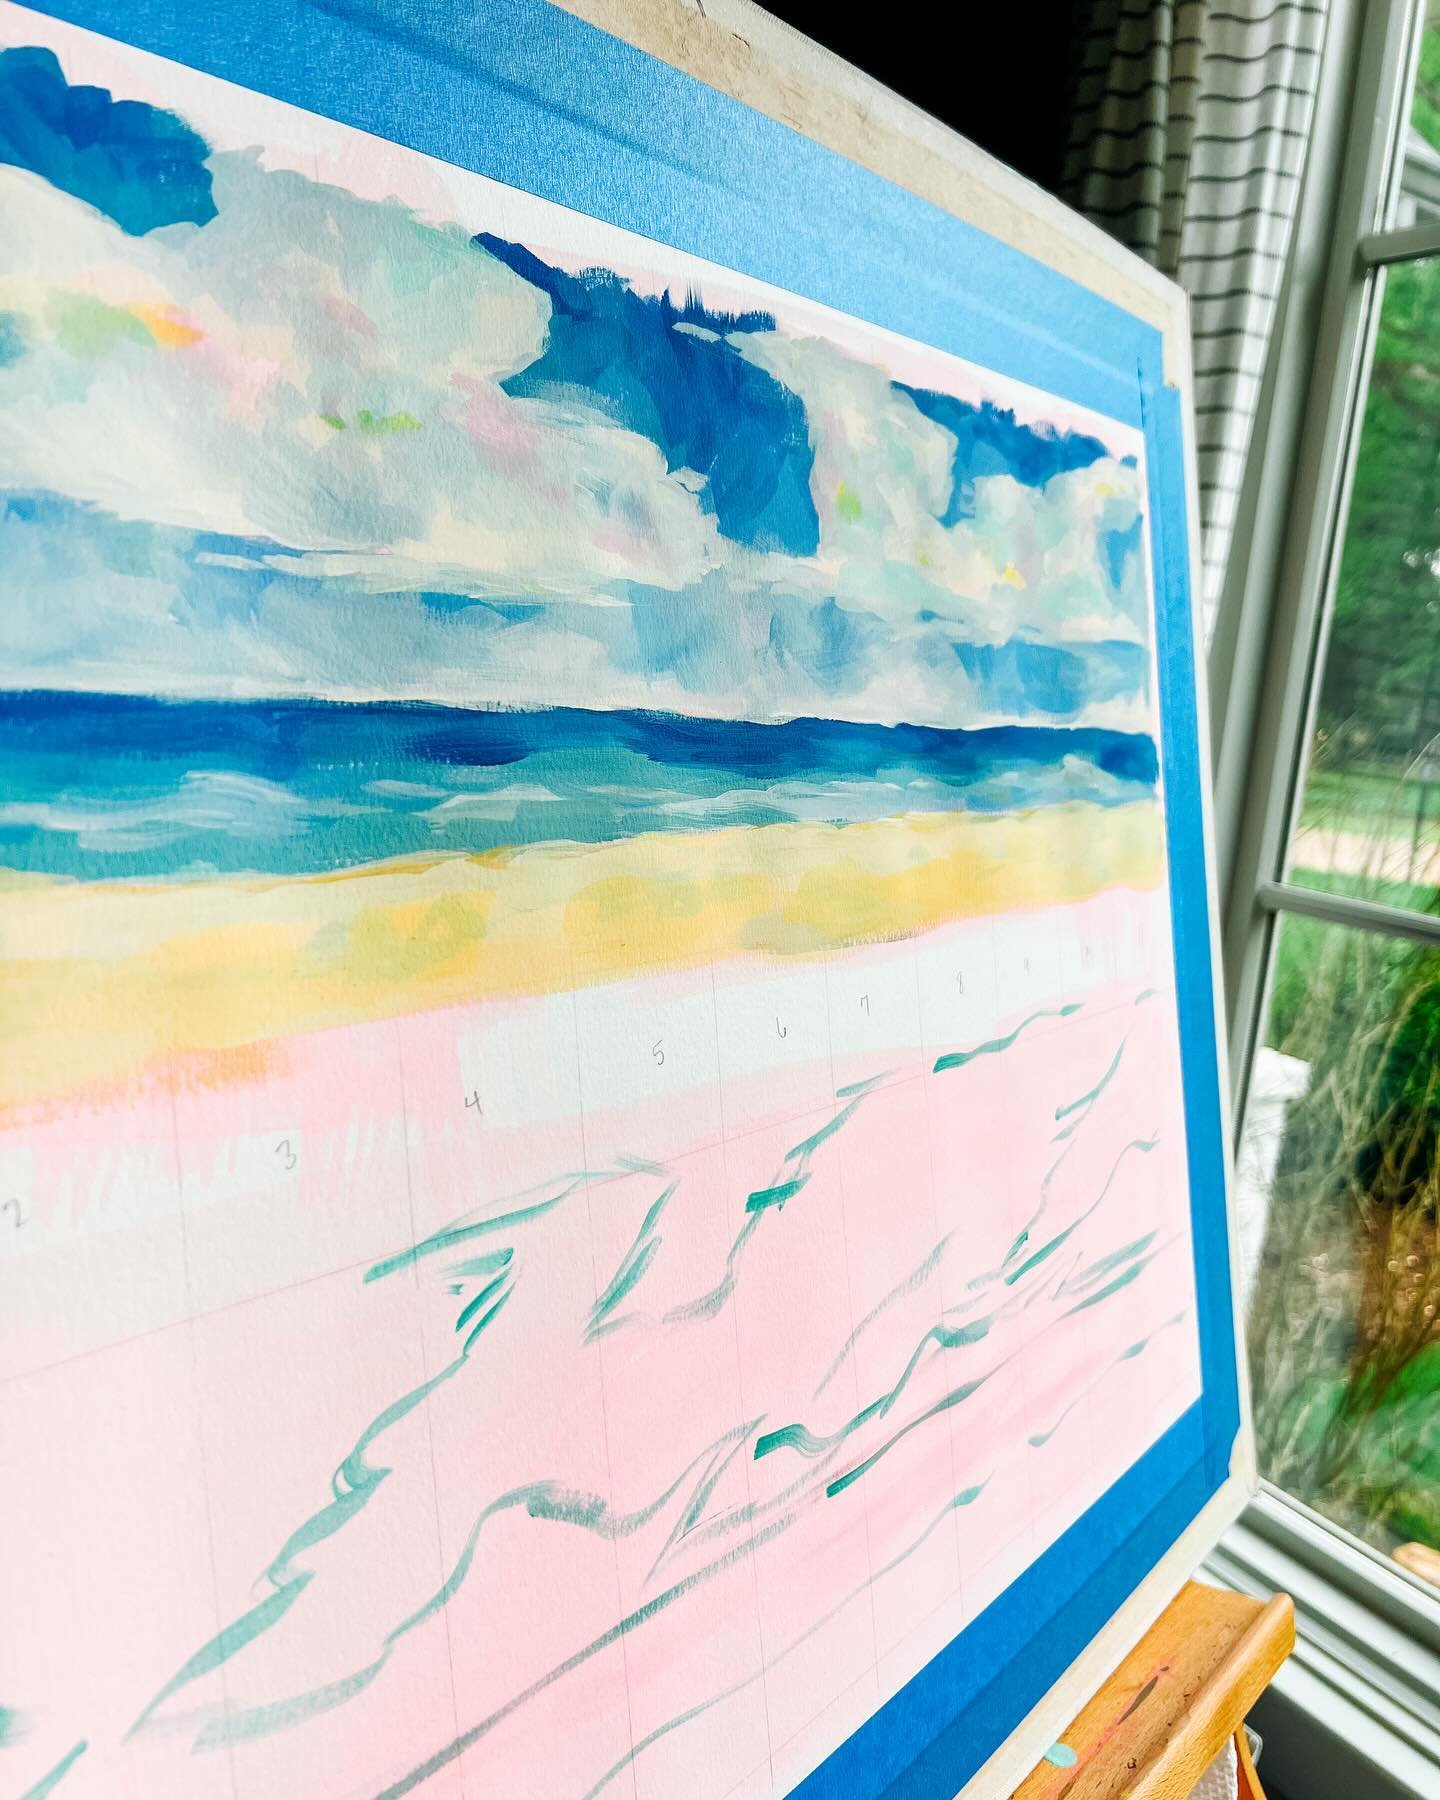 Alys Beach bookmarks are in the shop! I had a blast making the Florida bookmarks as a one-and-done, but then heard a note in the @doitfortheprocess podcast to pick a scene and do it over and over so I measured out two beach scape paintings and if tha